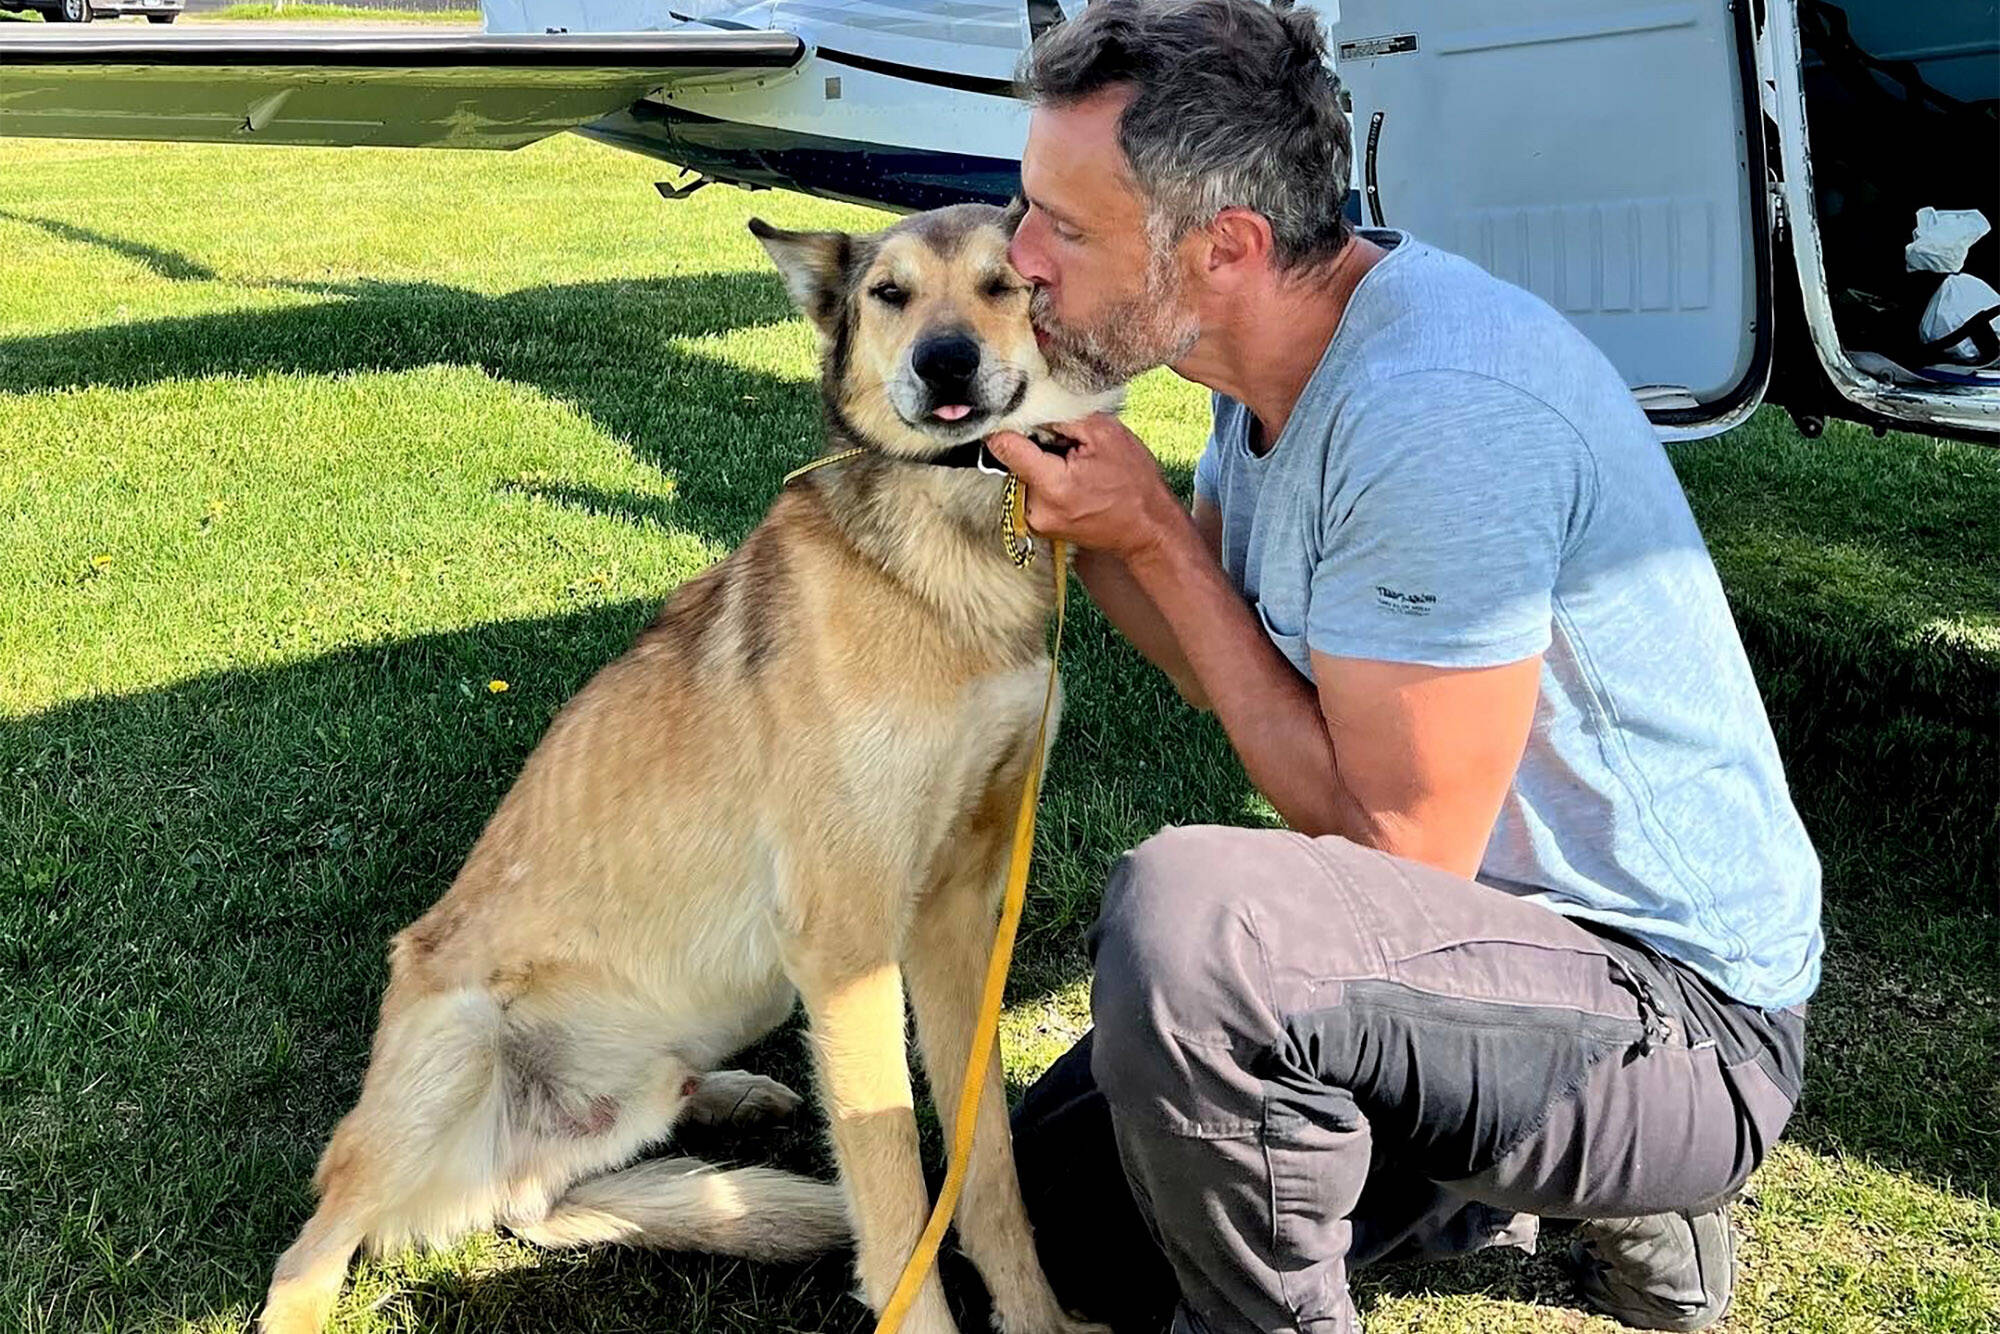 In this photo provided by Regal Air, musher Sebastien Dos Santos Borges, of France, and sled dog Leon arrive in Anchorage, Alaska, Saturday, June 4, 2022, after being reunited. The Iditarod Trail Committee says Leon went missing in March during the nearly 1,000-mile race across Alaska before being found three months later after covering nearly 150 miles. Leon was expected to see a veterinarian in the coming days and needs a health certificate before he can fly back to France, Iditarod spokesperson Shannon Markley said. (Rebecca Clark/Regal Air via AP)